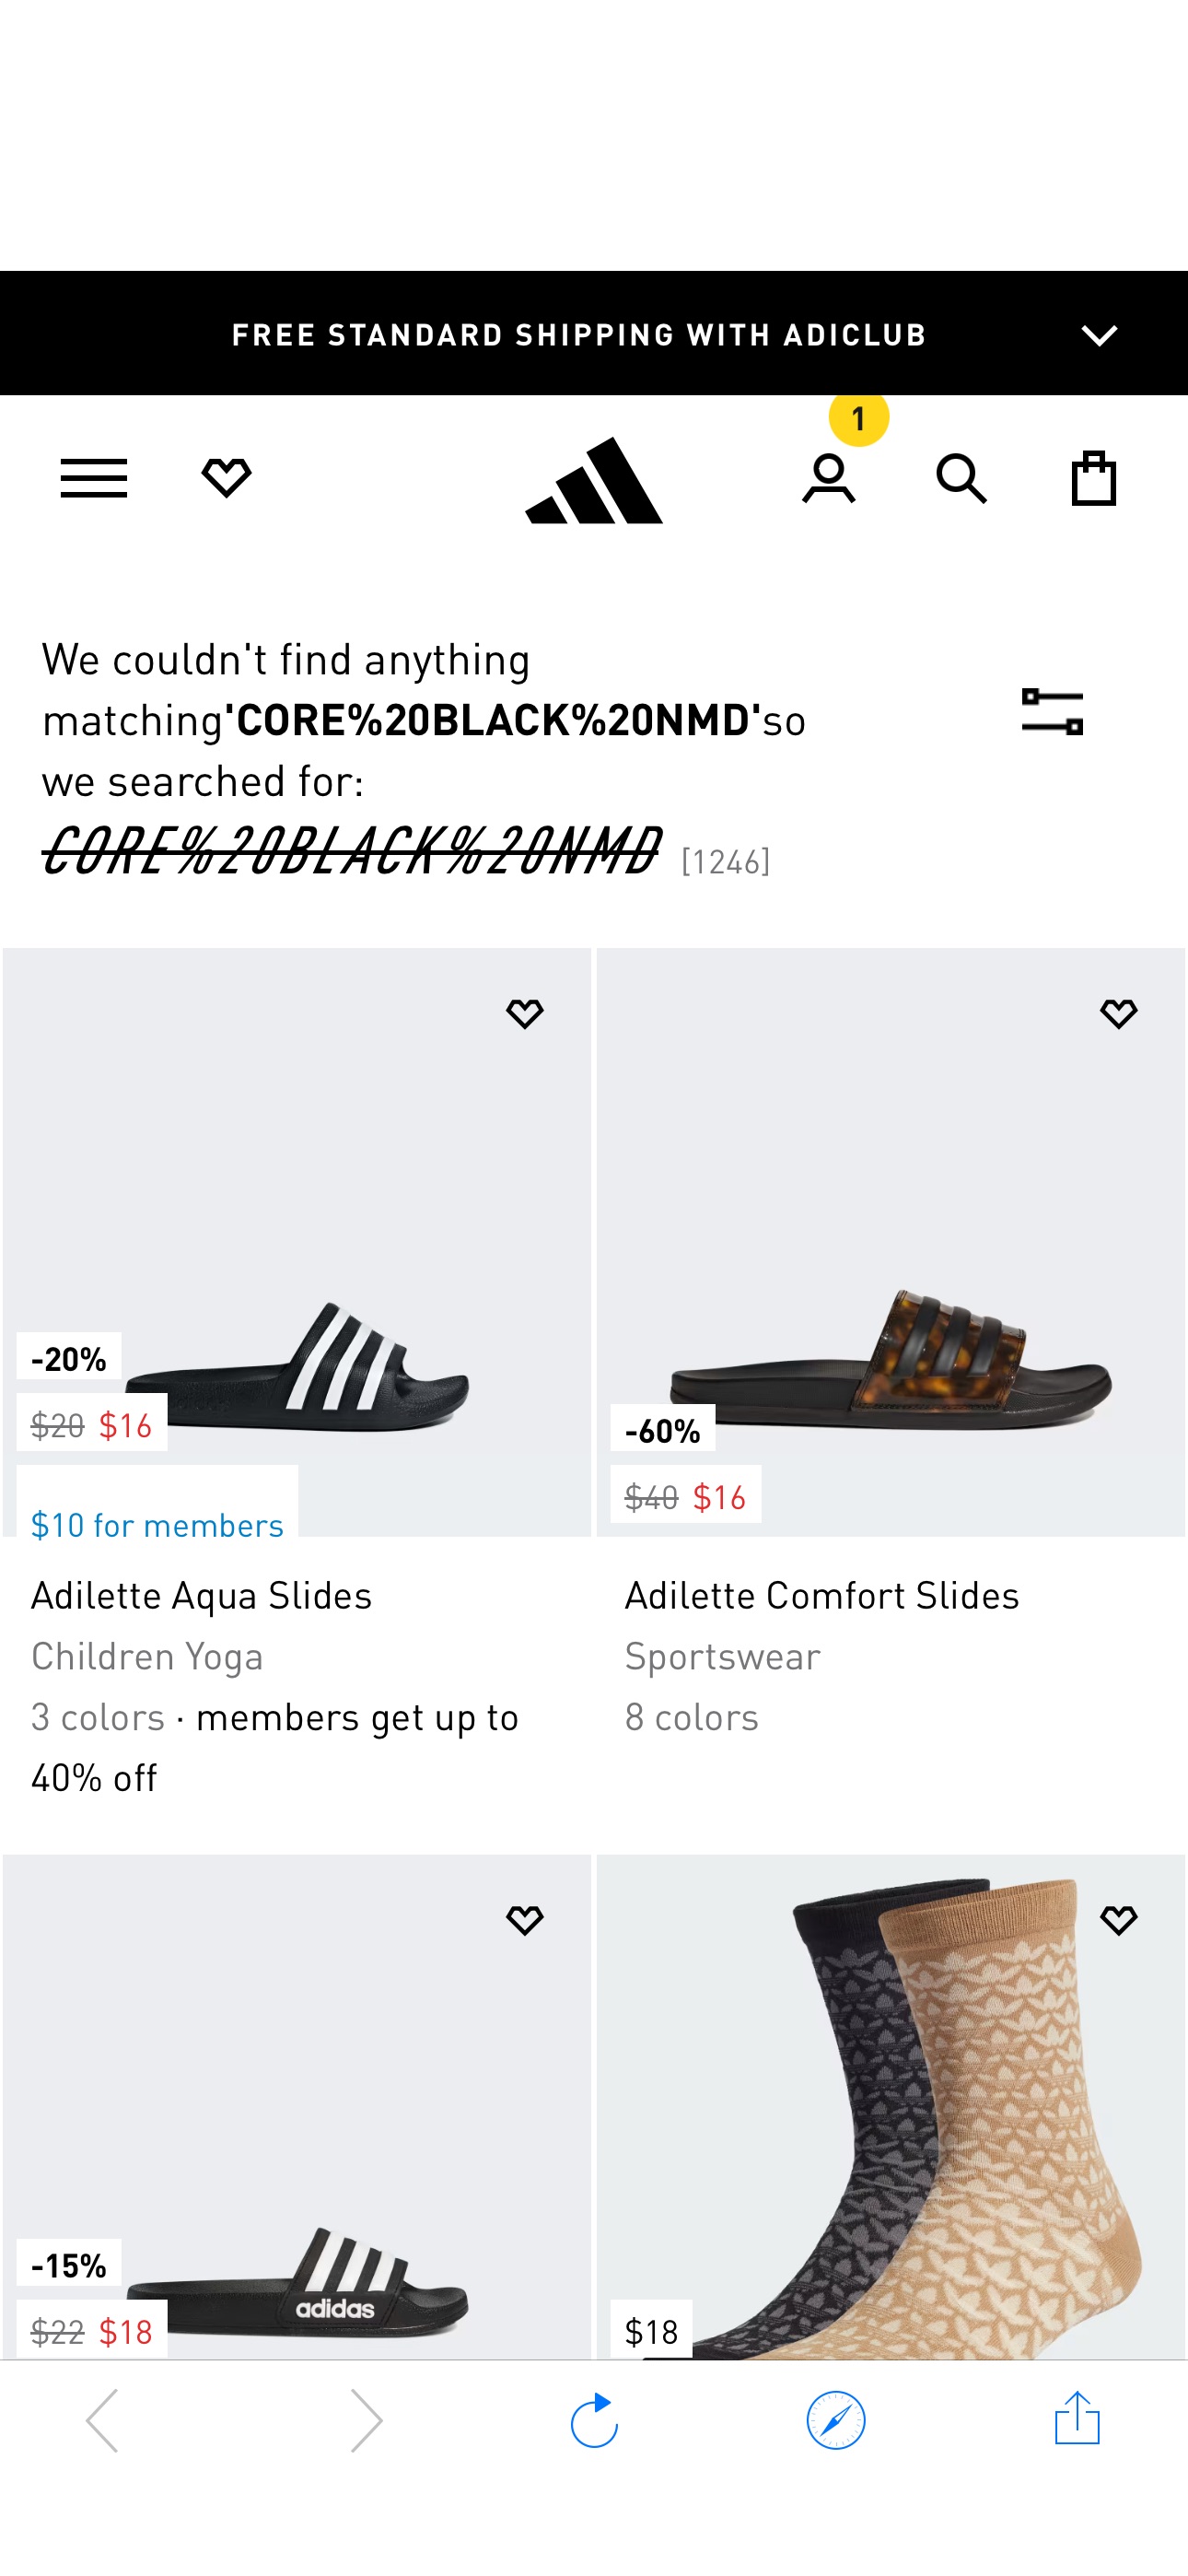 adidas Online Shop | adidas US Adidas NMD as low as $17
Log in and use code BMS18ADP